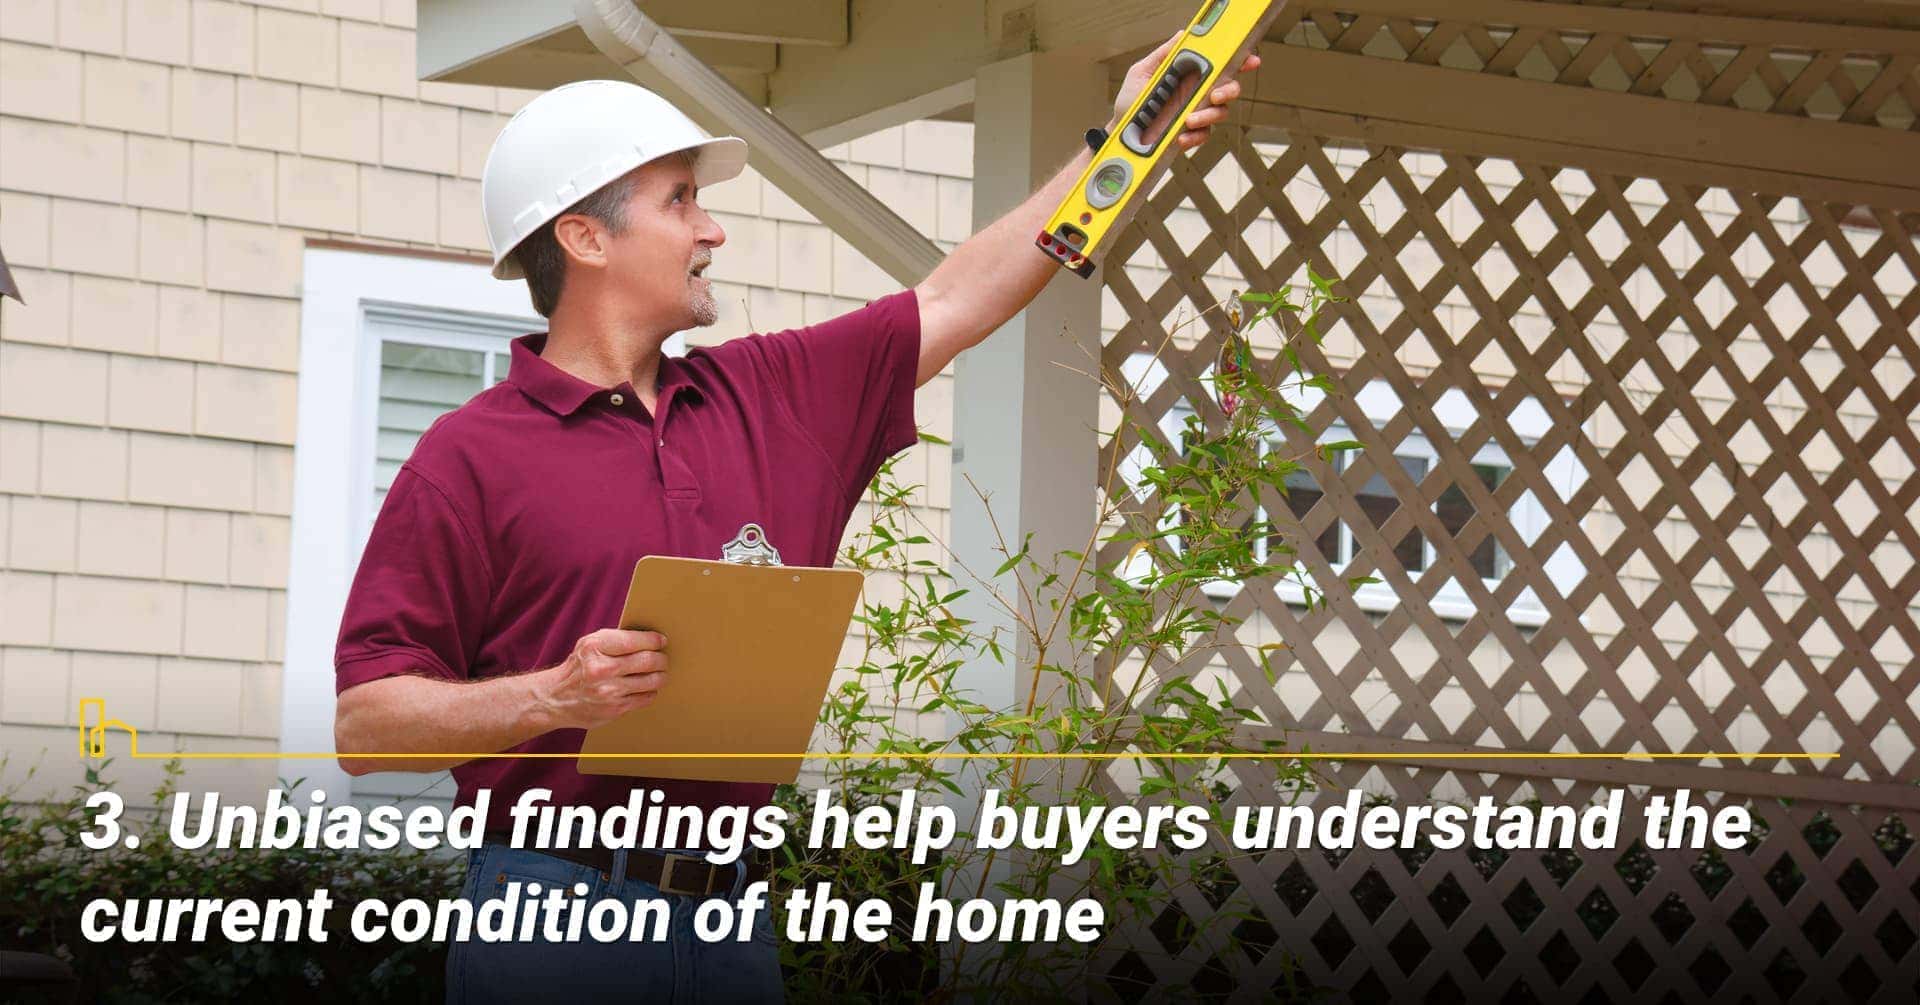 Unbiased findings help buyers understand the current condition of the home, potential home buyers make decision partially based on the home inspection report